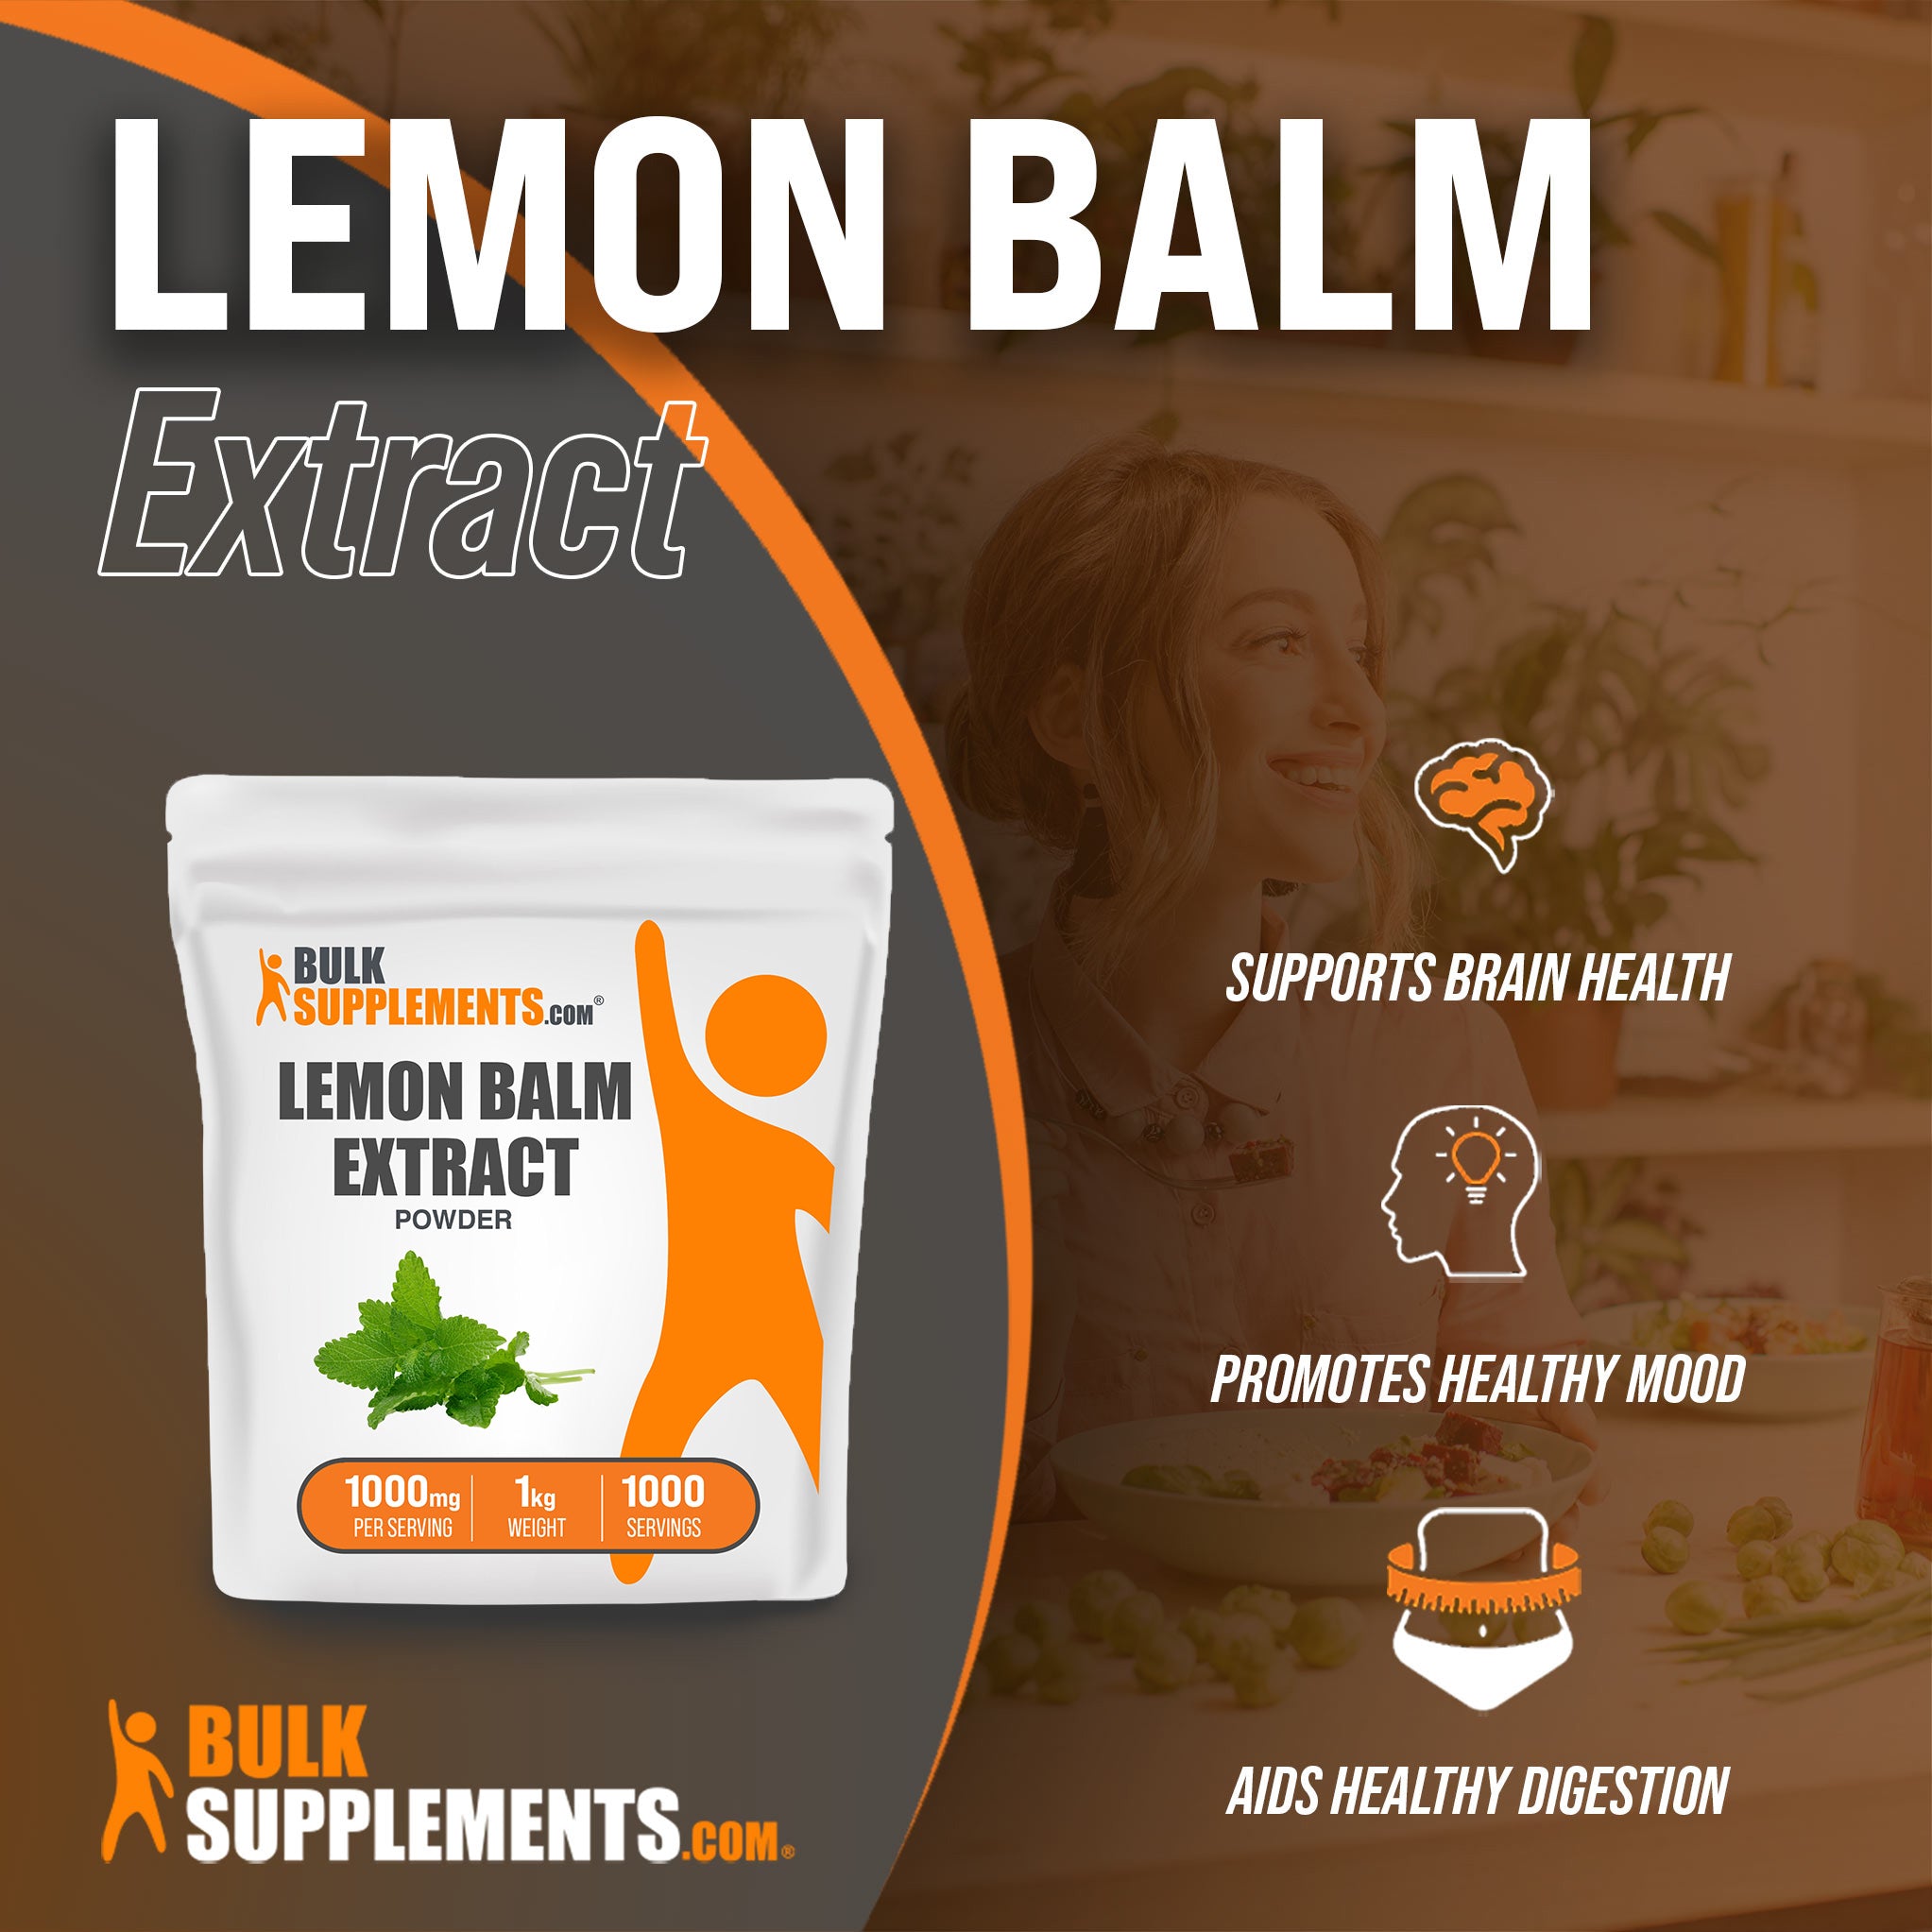 Benefits of Lemon Balm Extract: supports brain health, promotes healthy mood, aids healthy digestion